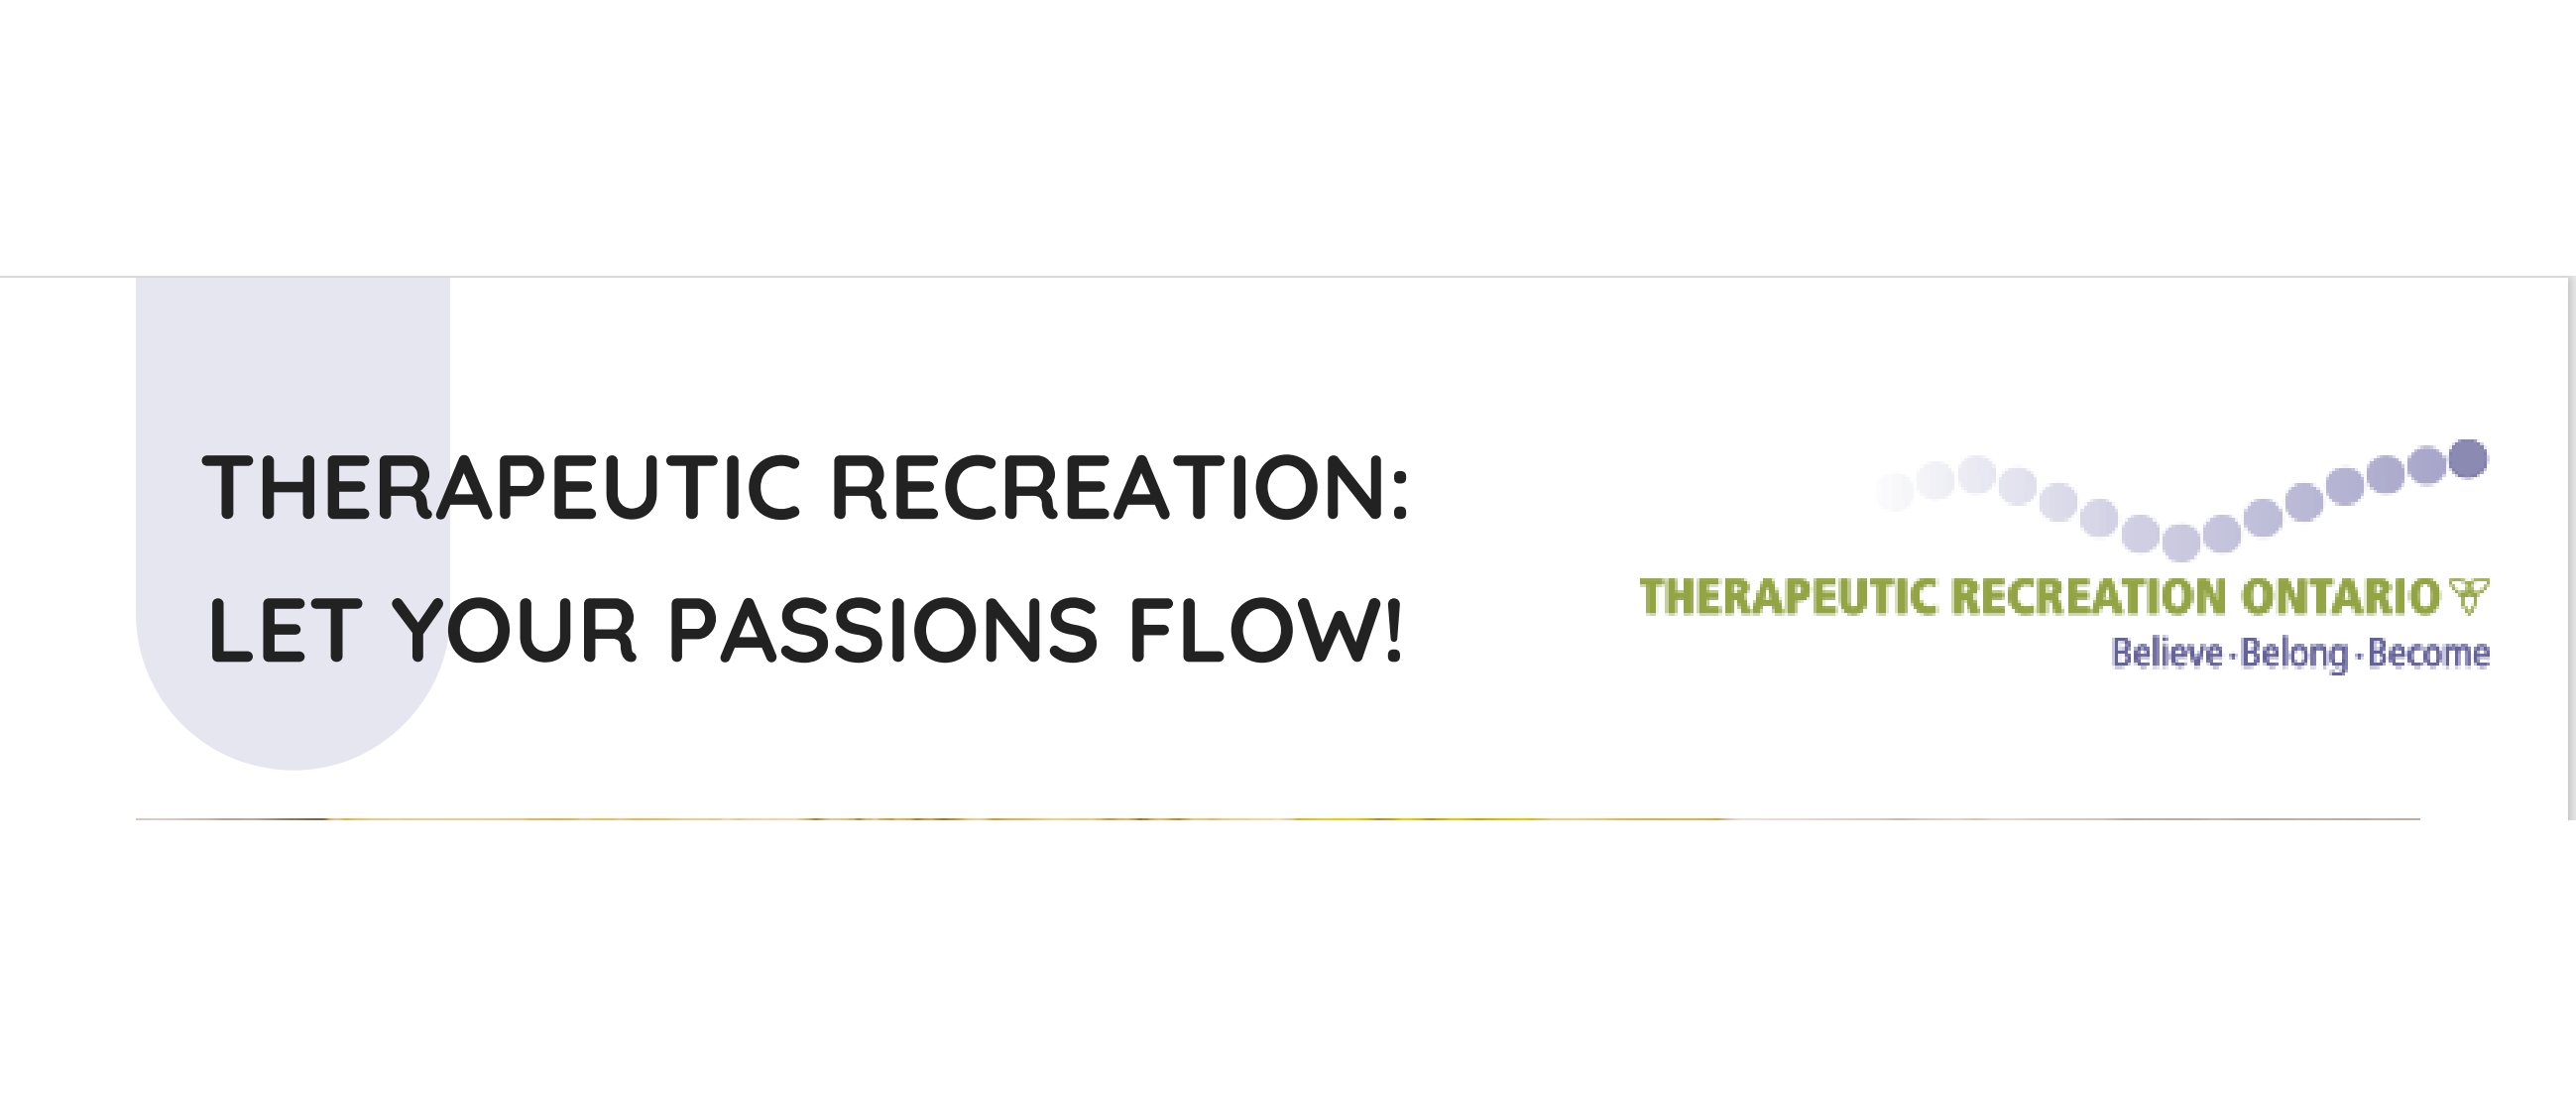 Therapeutic Recreation month begins